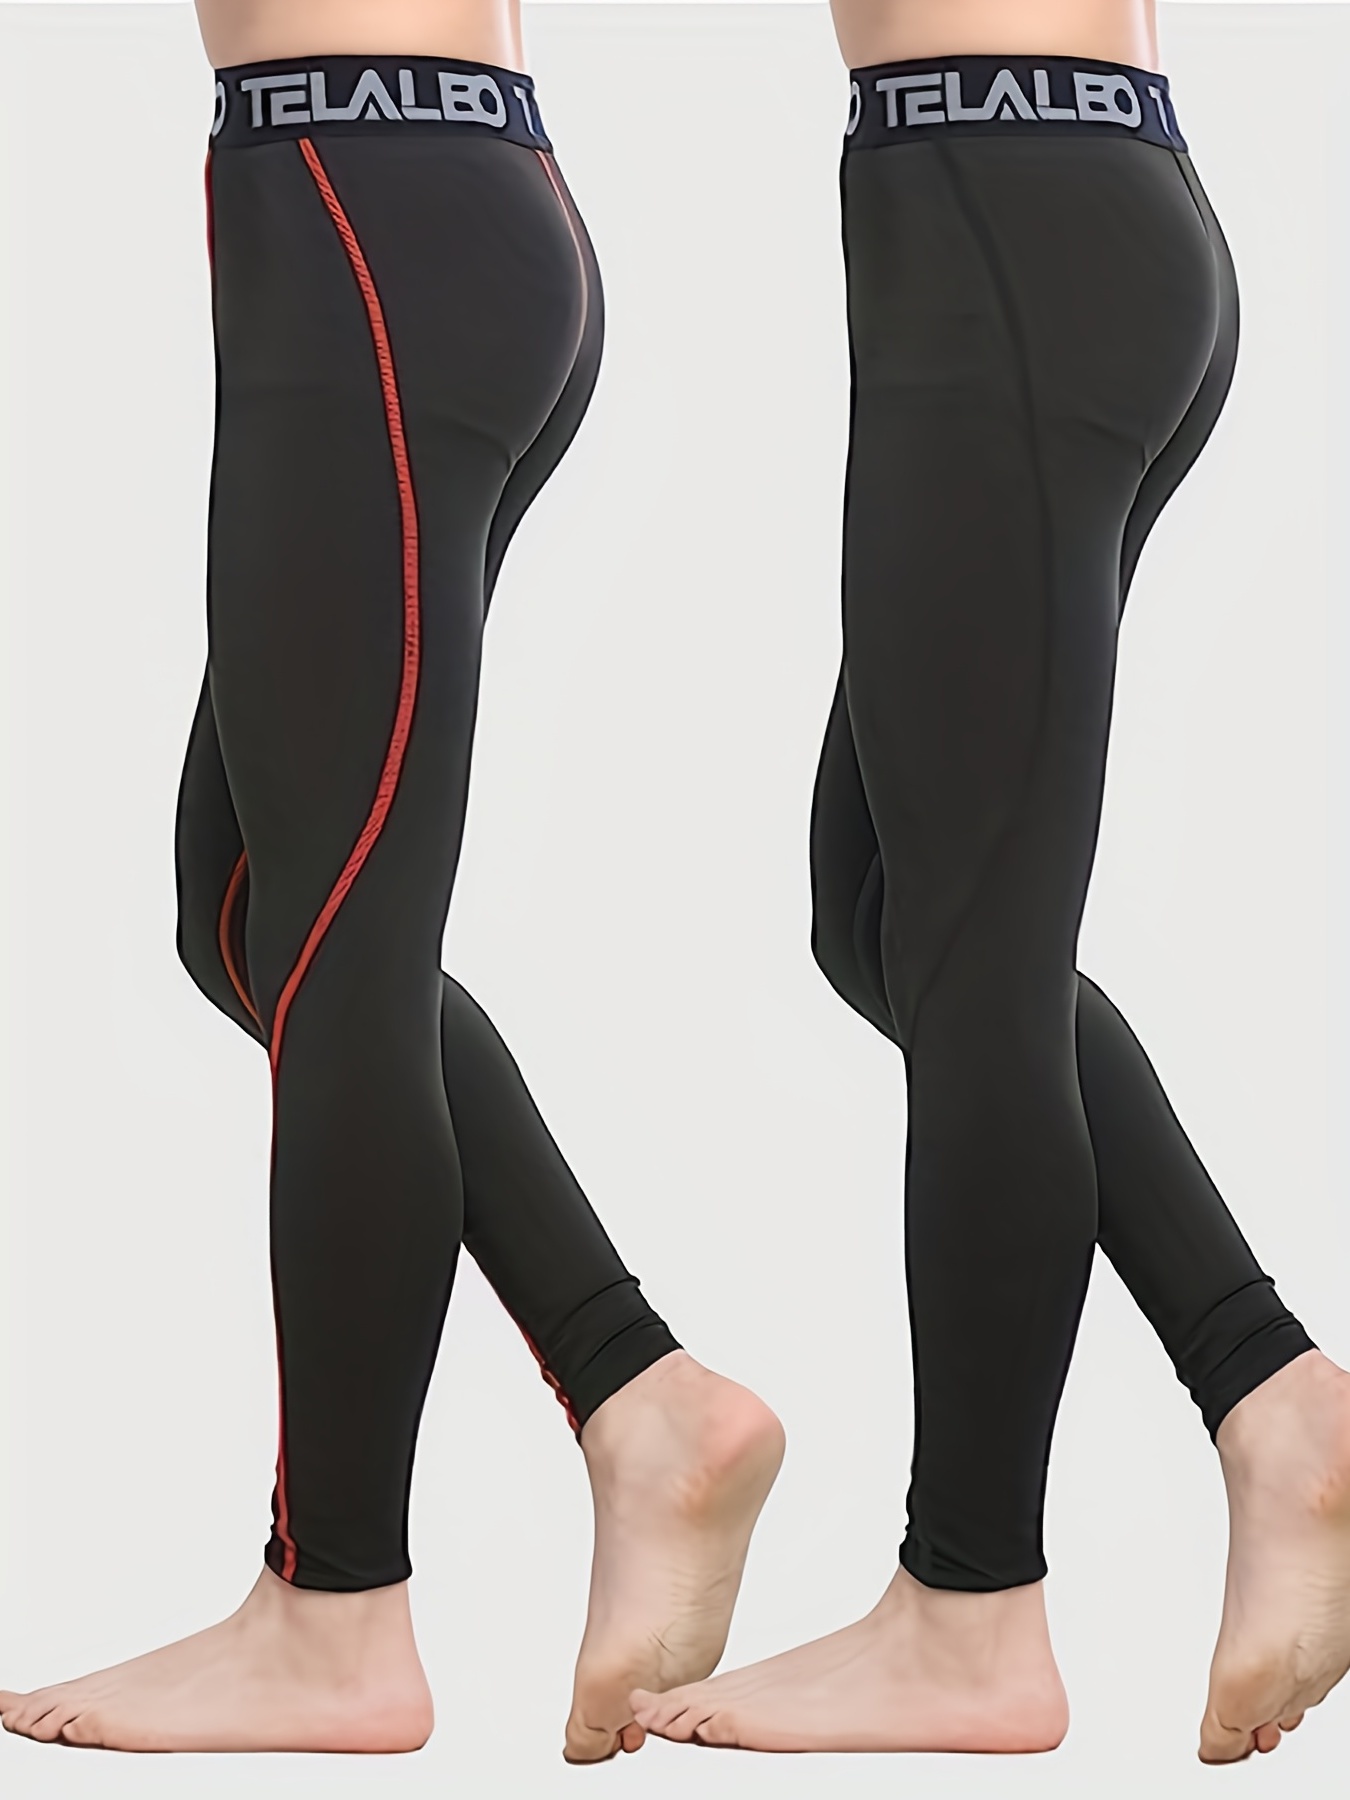  Base Layers & Compression: Clothing, Shoes & Jewelry:  Compression Tops, Compression Pants & Tights & More